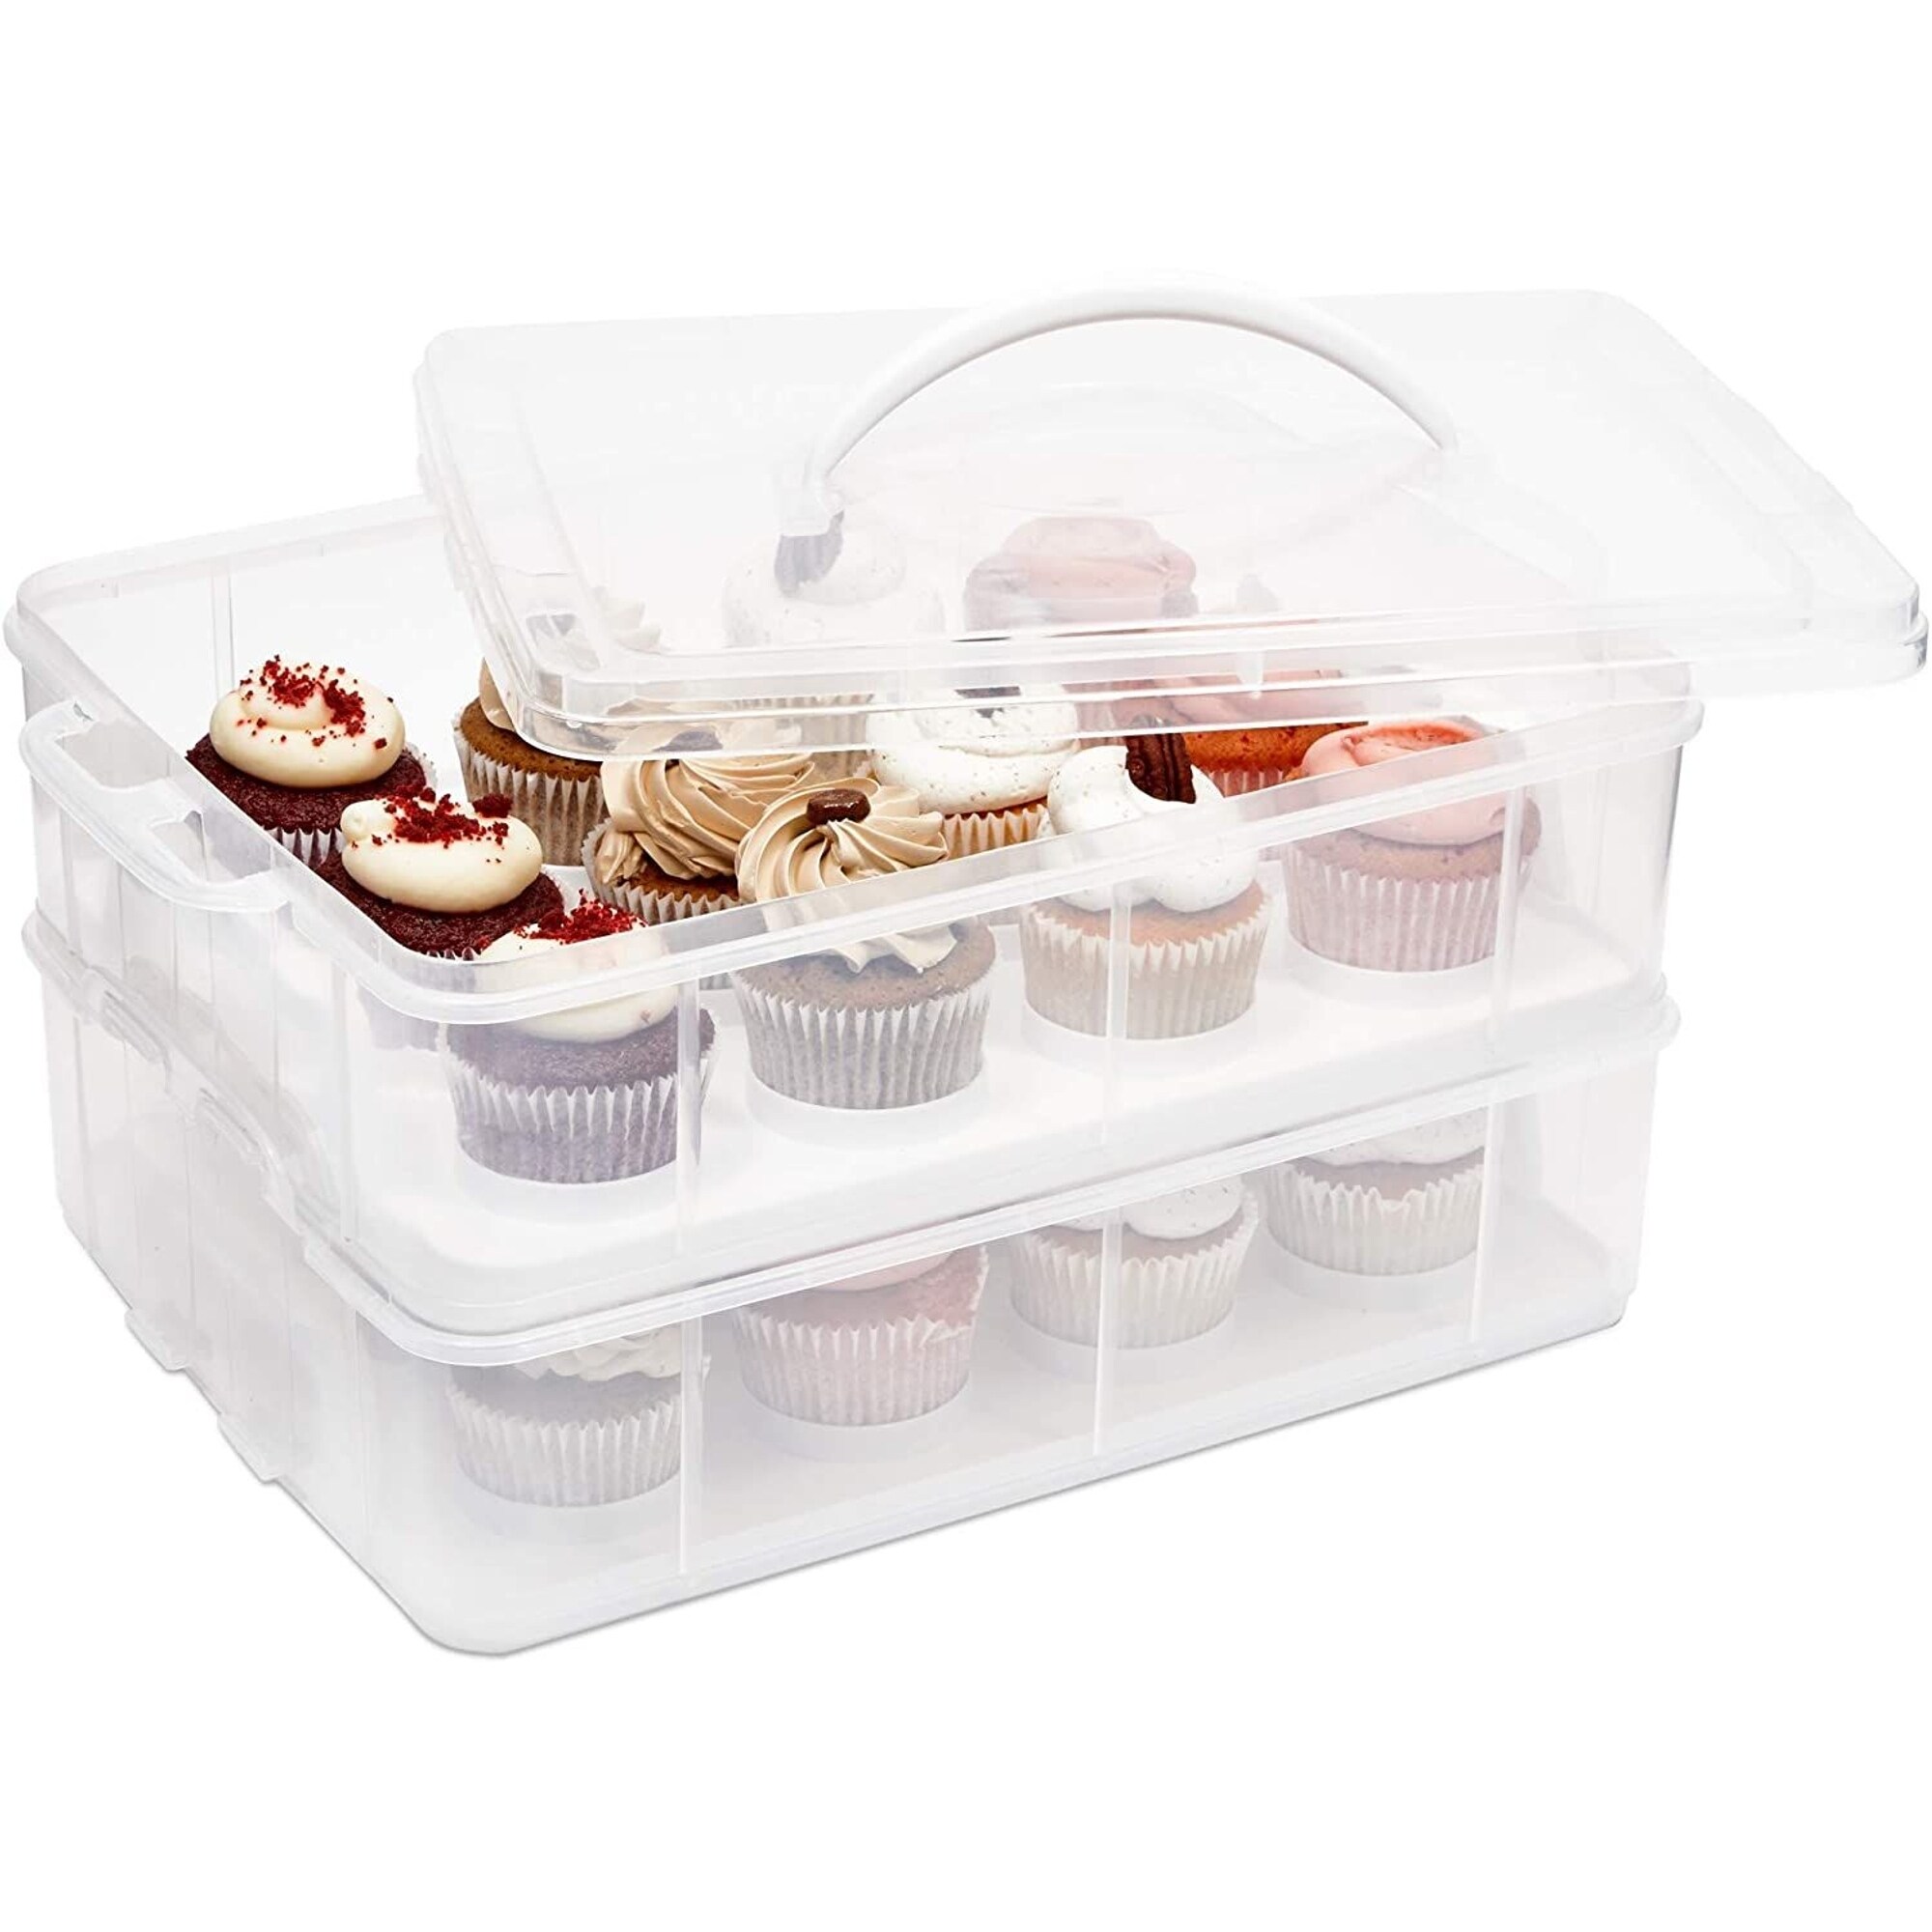 https://ak1.ostkcdn.com/images/products/is/images/direct/0a3c410104bf0609a208d2f1147df59b5e4bf355/2-Tier-Cupcake-Carrier-with-Lid%2C-Holds-24-Cupcakes-%2813.5-x-10.25-x-7.5-In%29.jpg